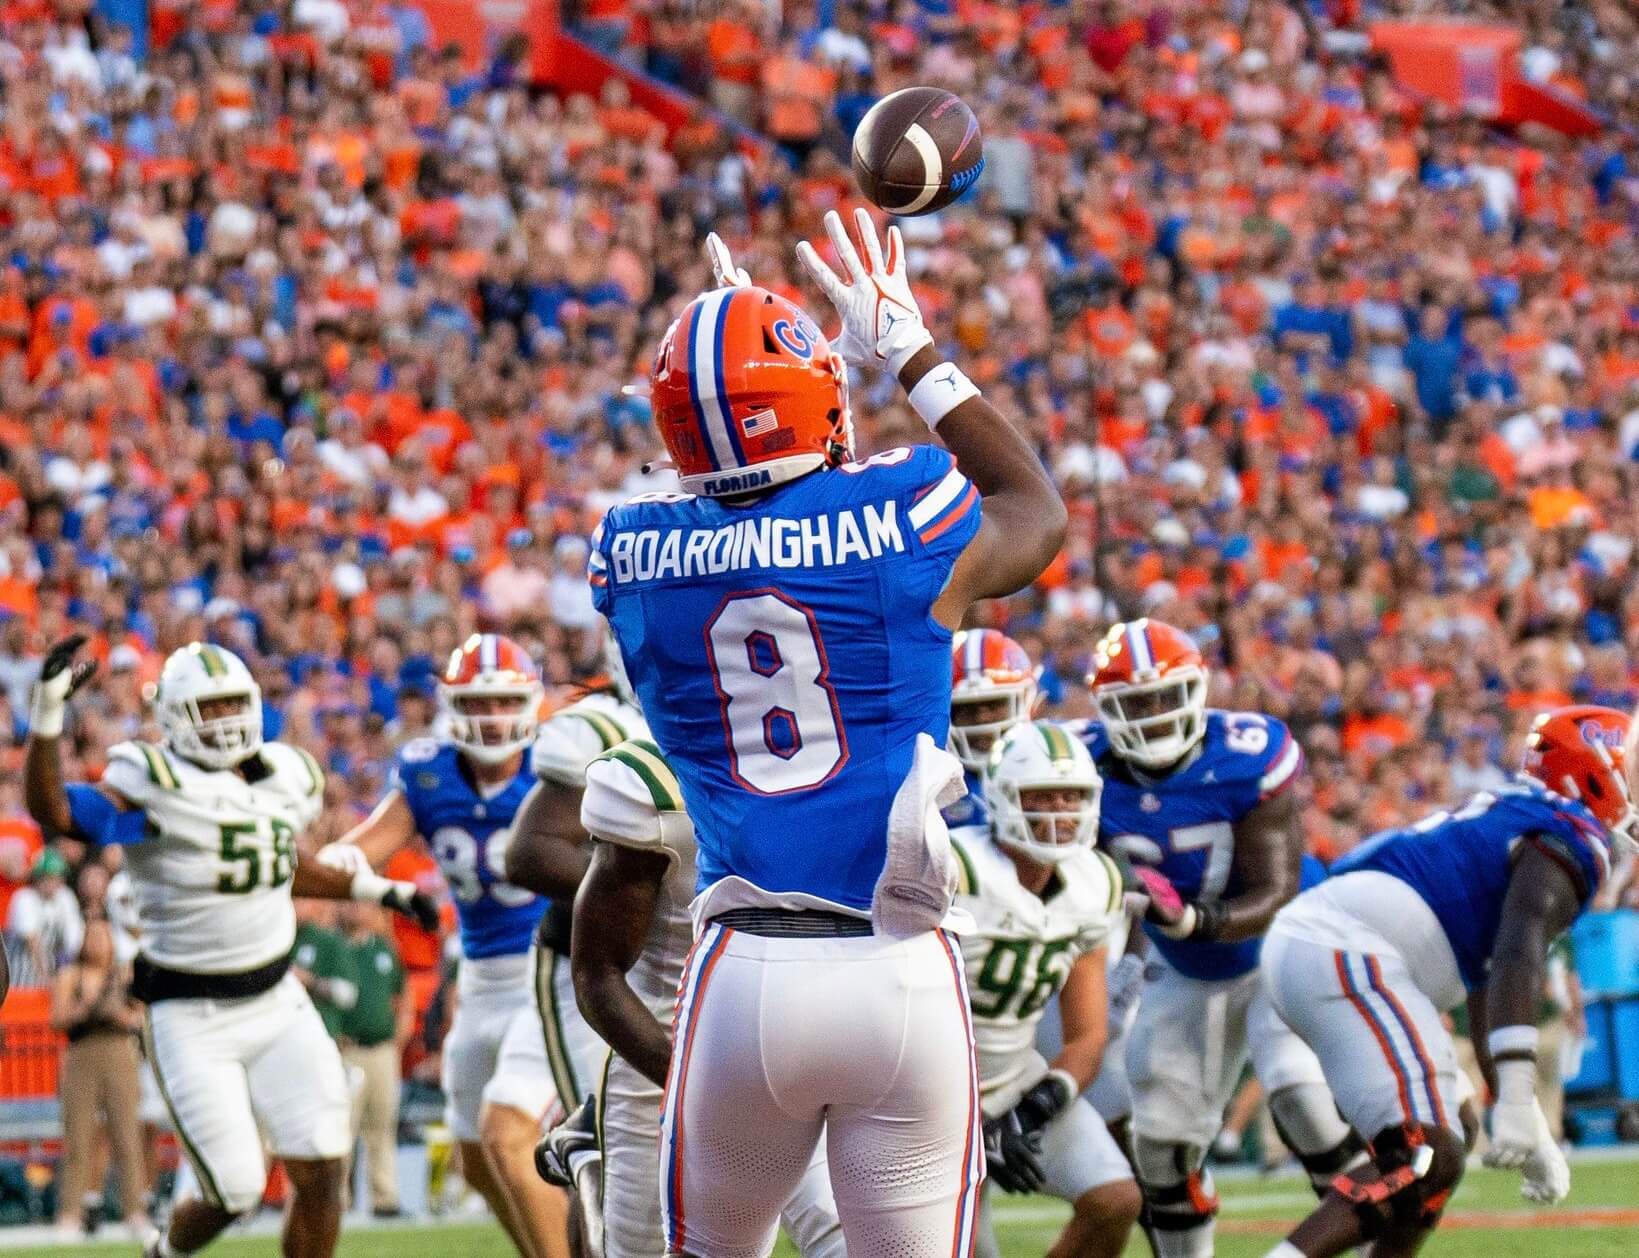 Just how rare was Gators' improbable win over Virginia?